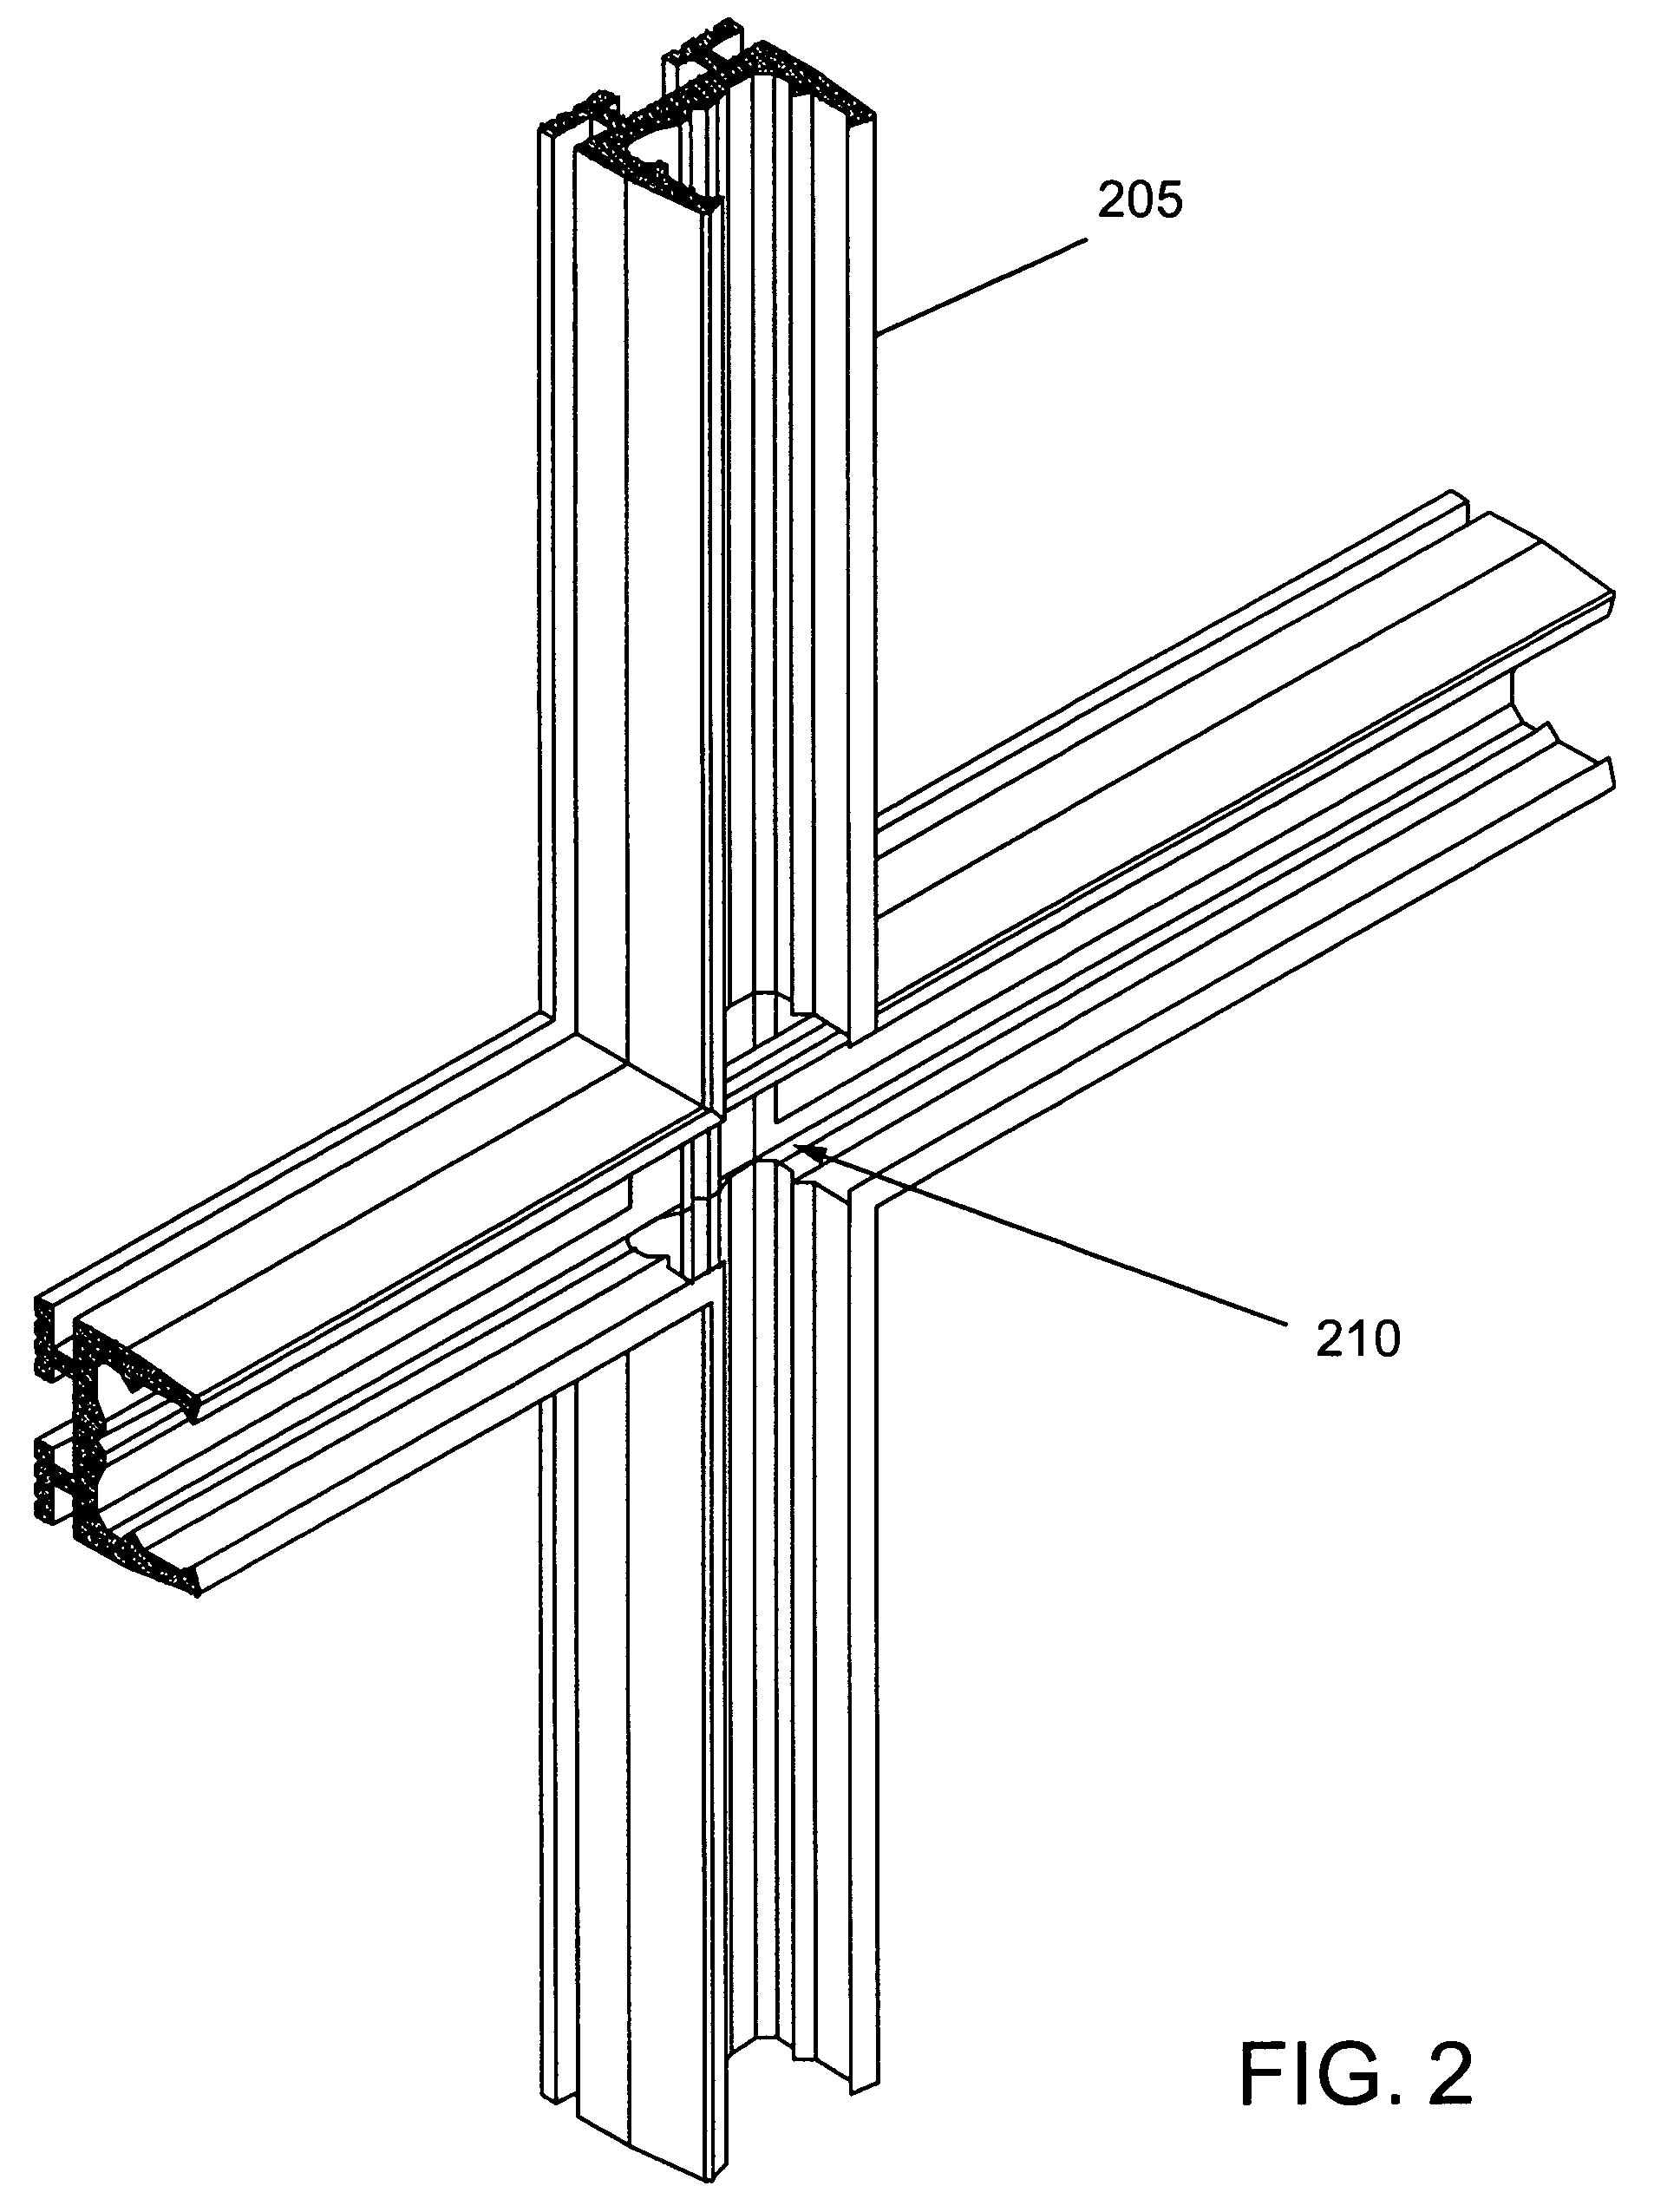 ACM panel retaining clip and self-adjusting coplanar panel mounting system